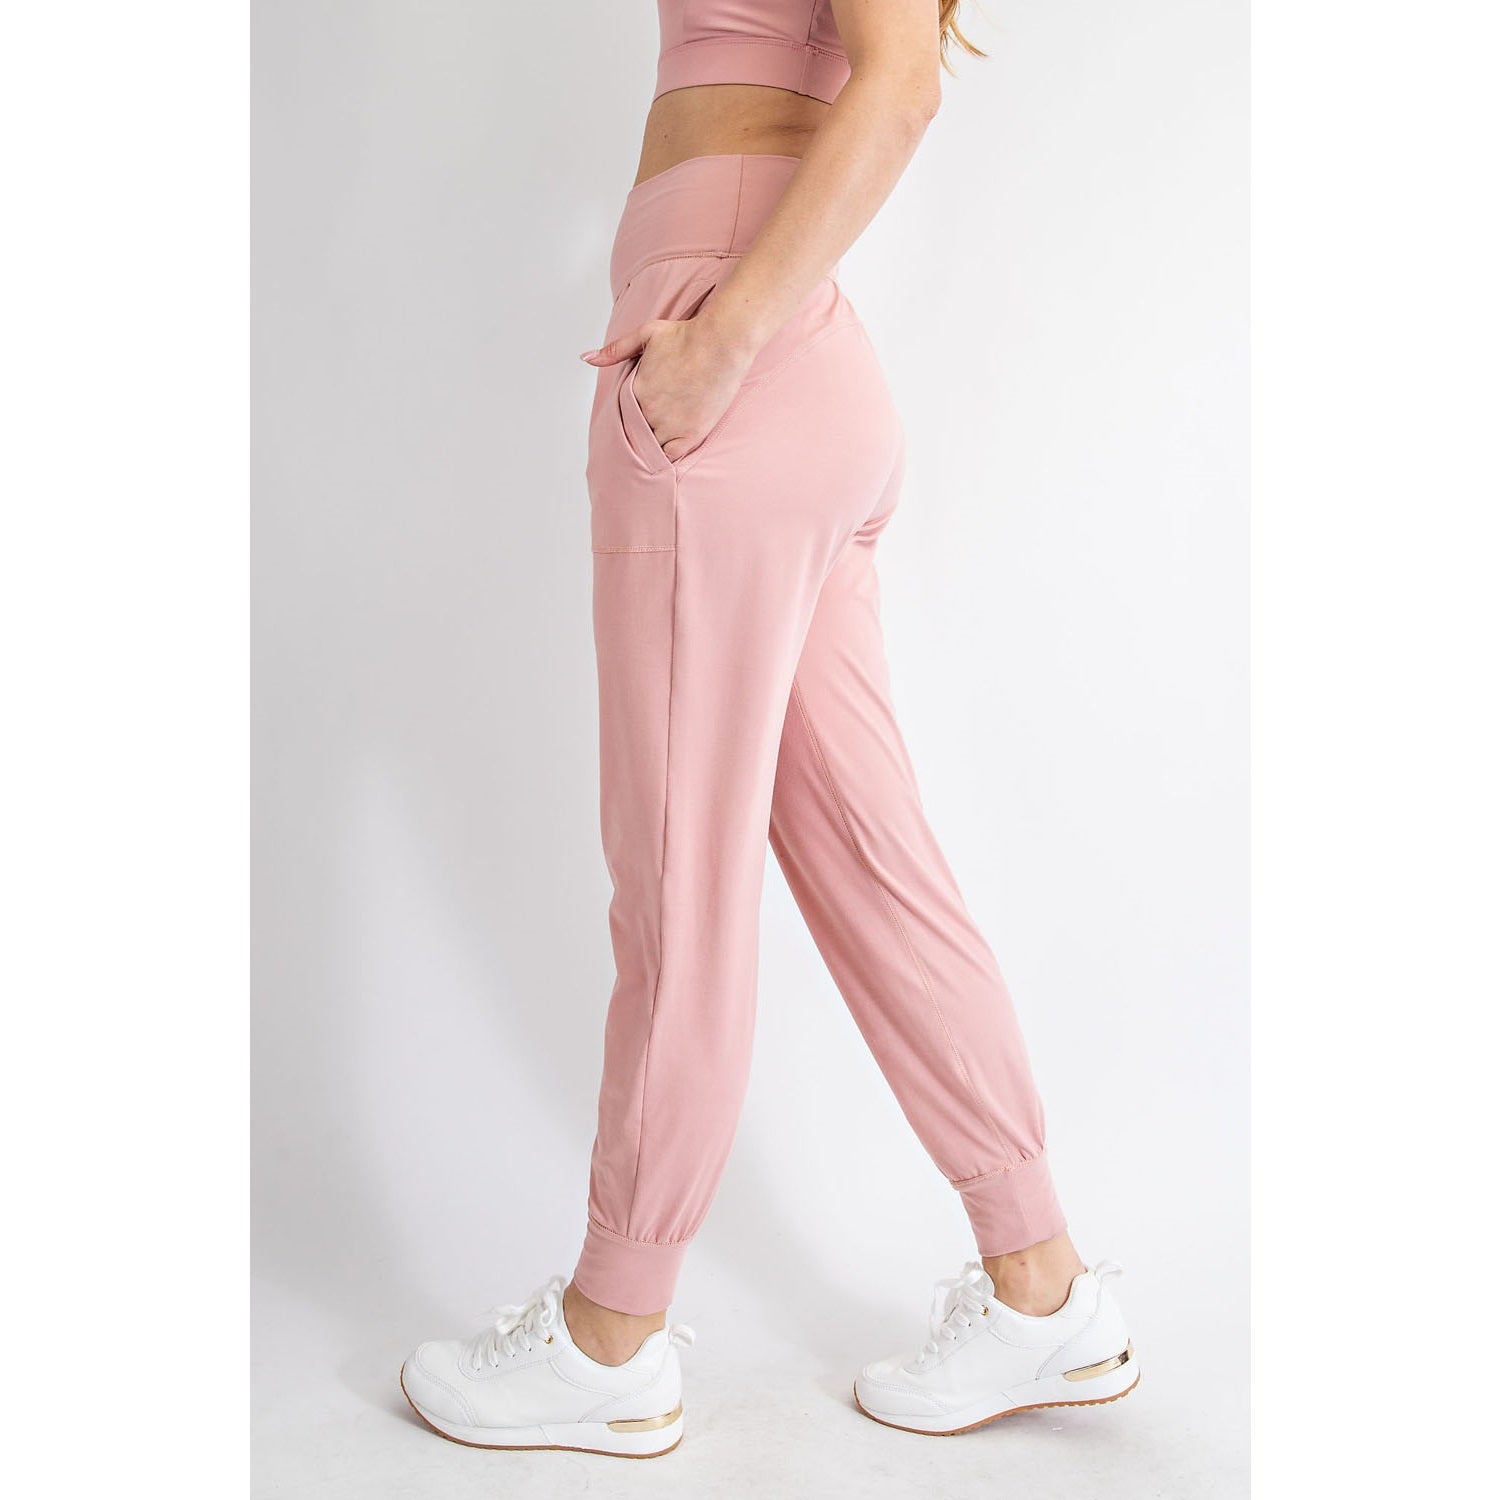 One – Soft Butter Just Thing Joggers